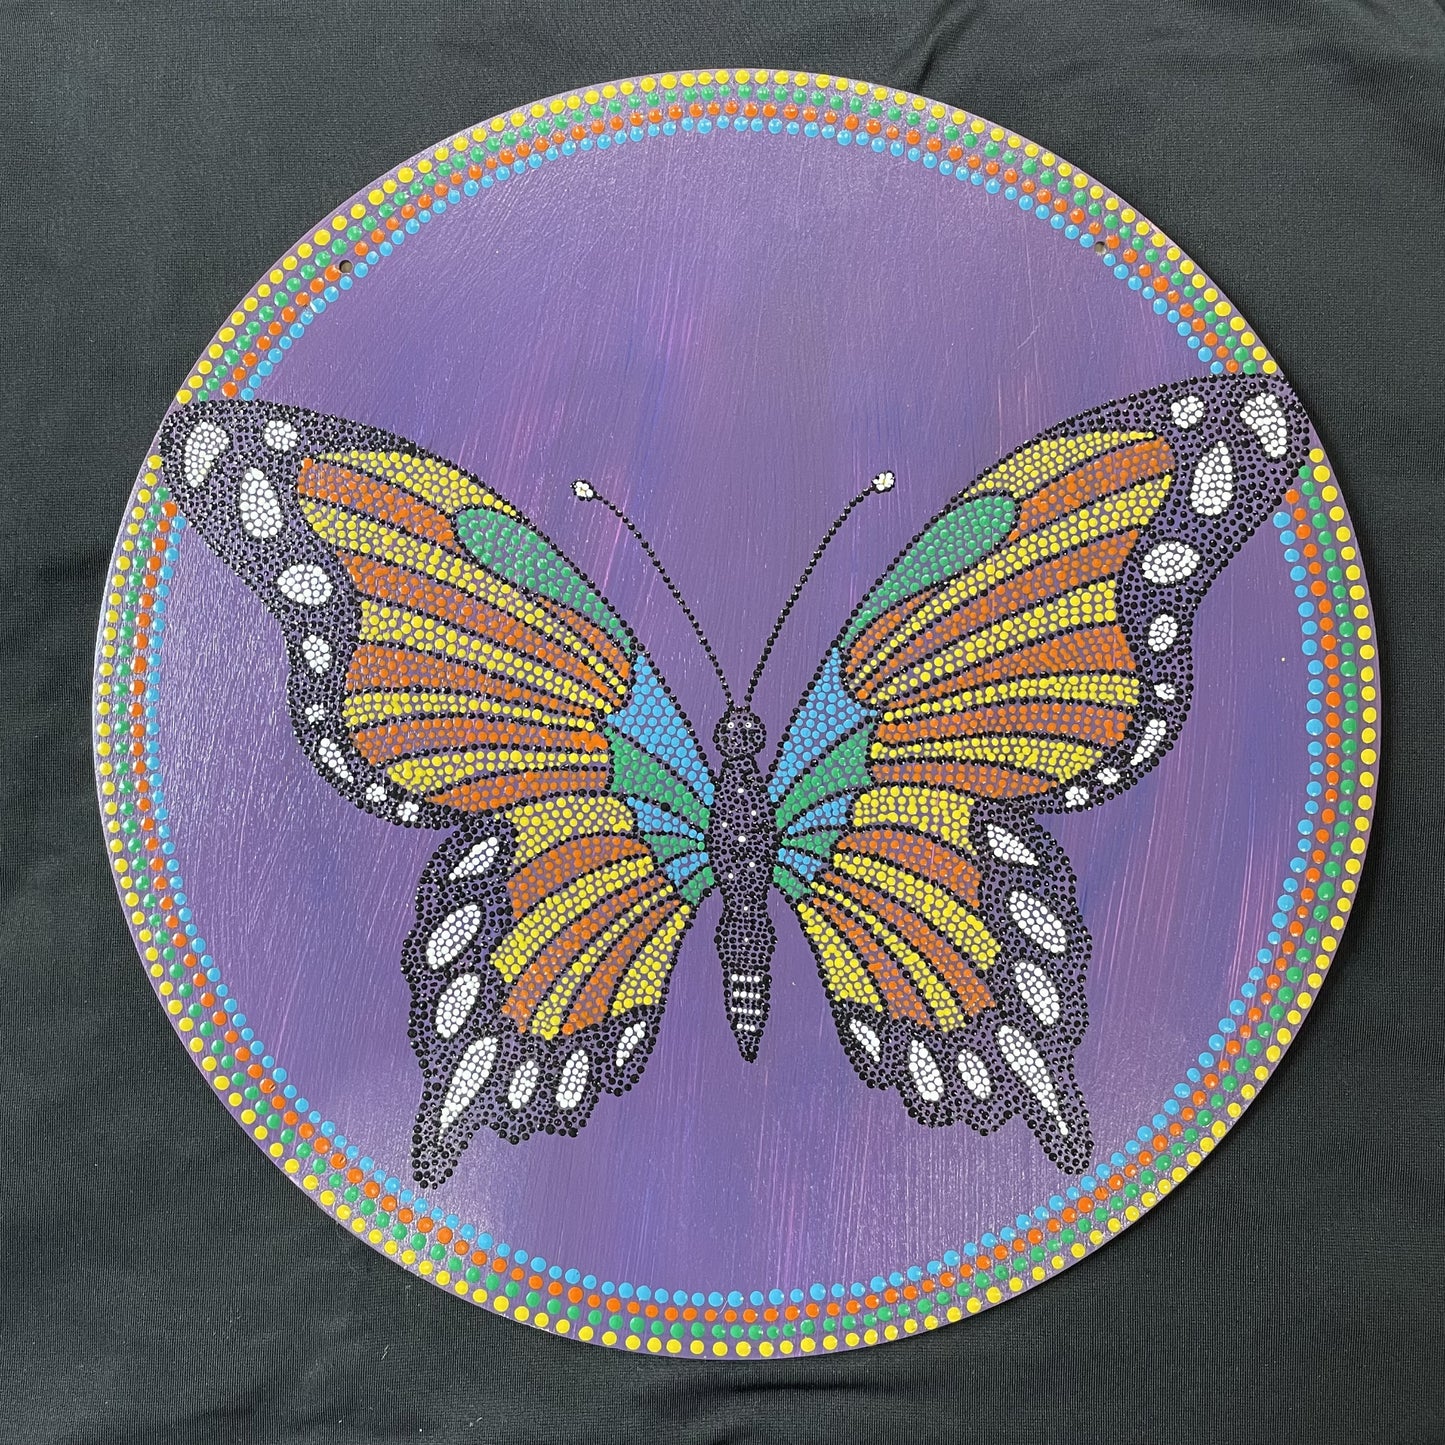 Butterfly Dot Art made by hand with Sawtooth Wall Hanging